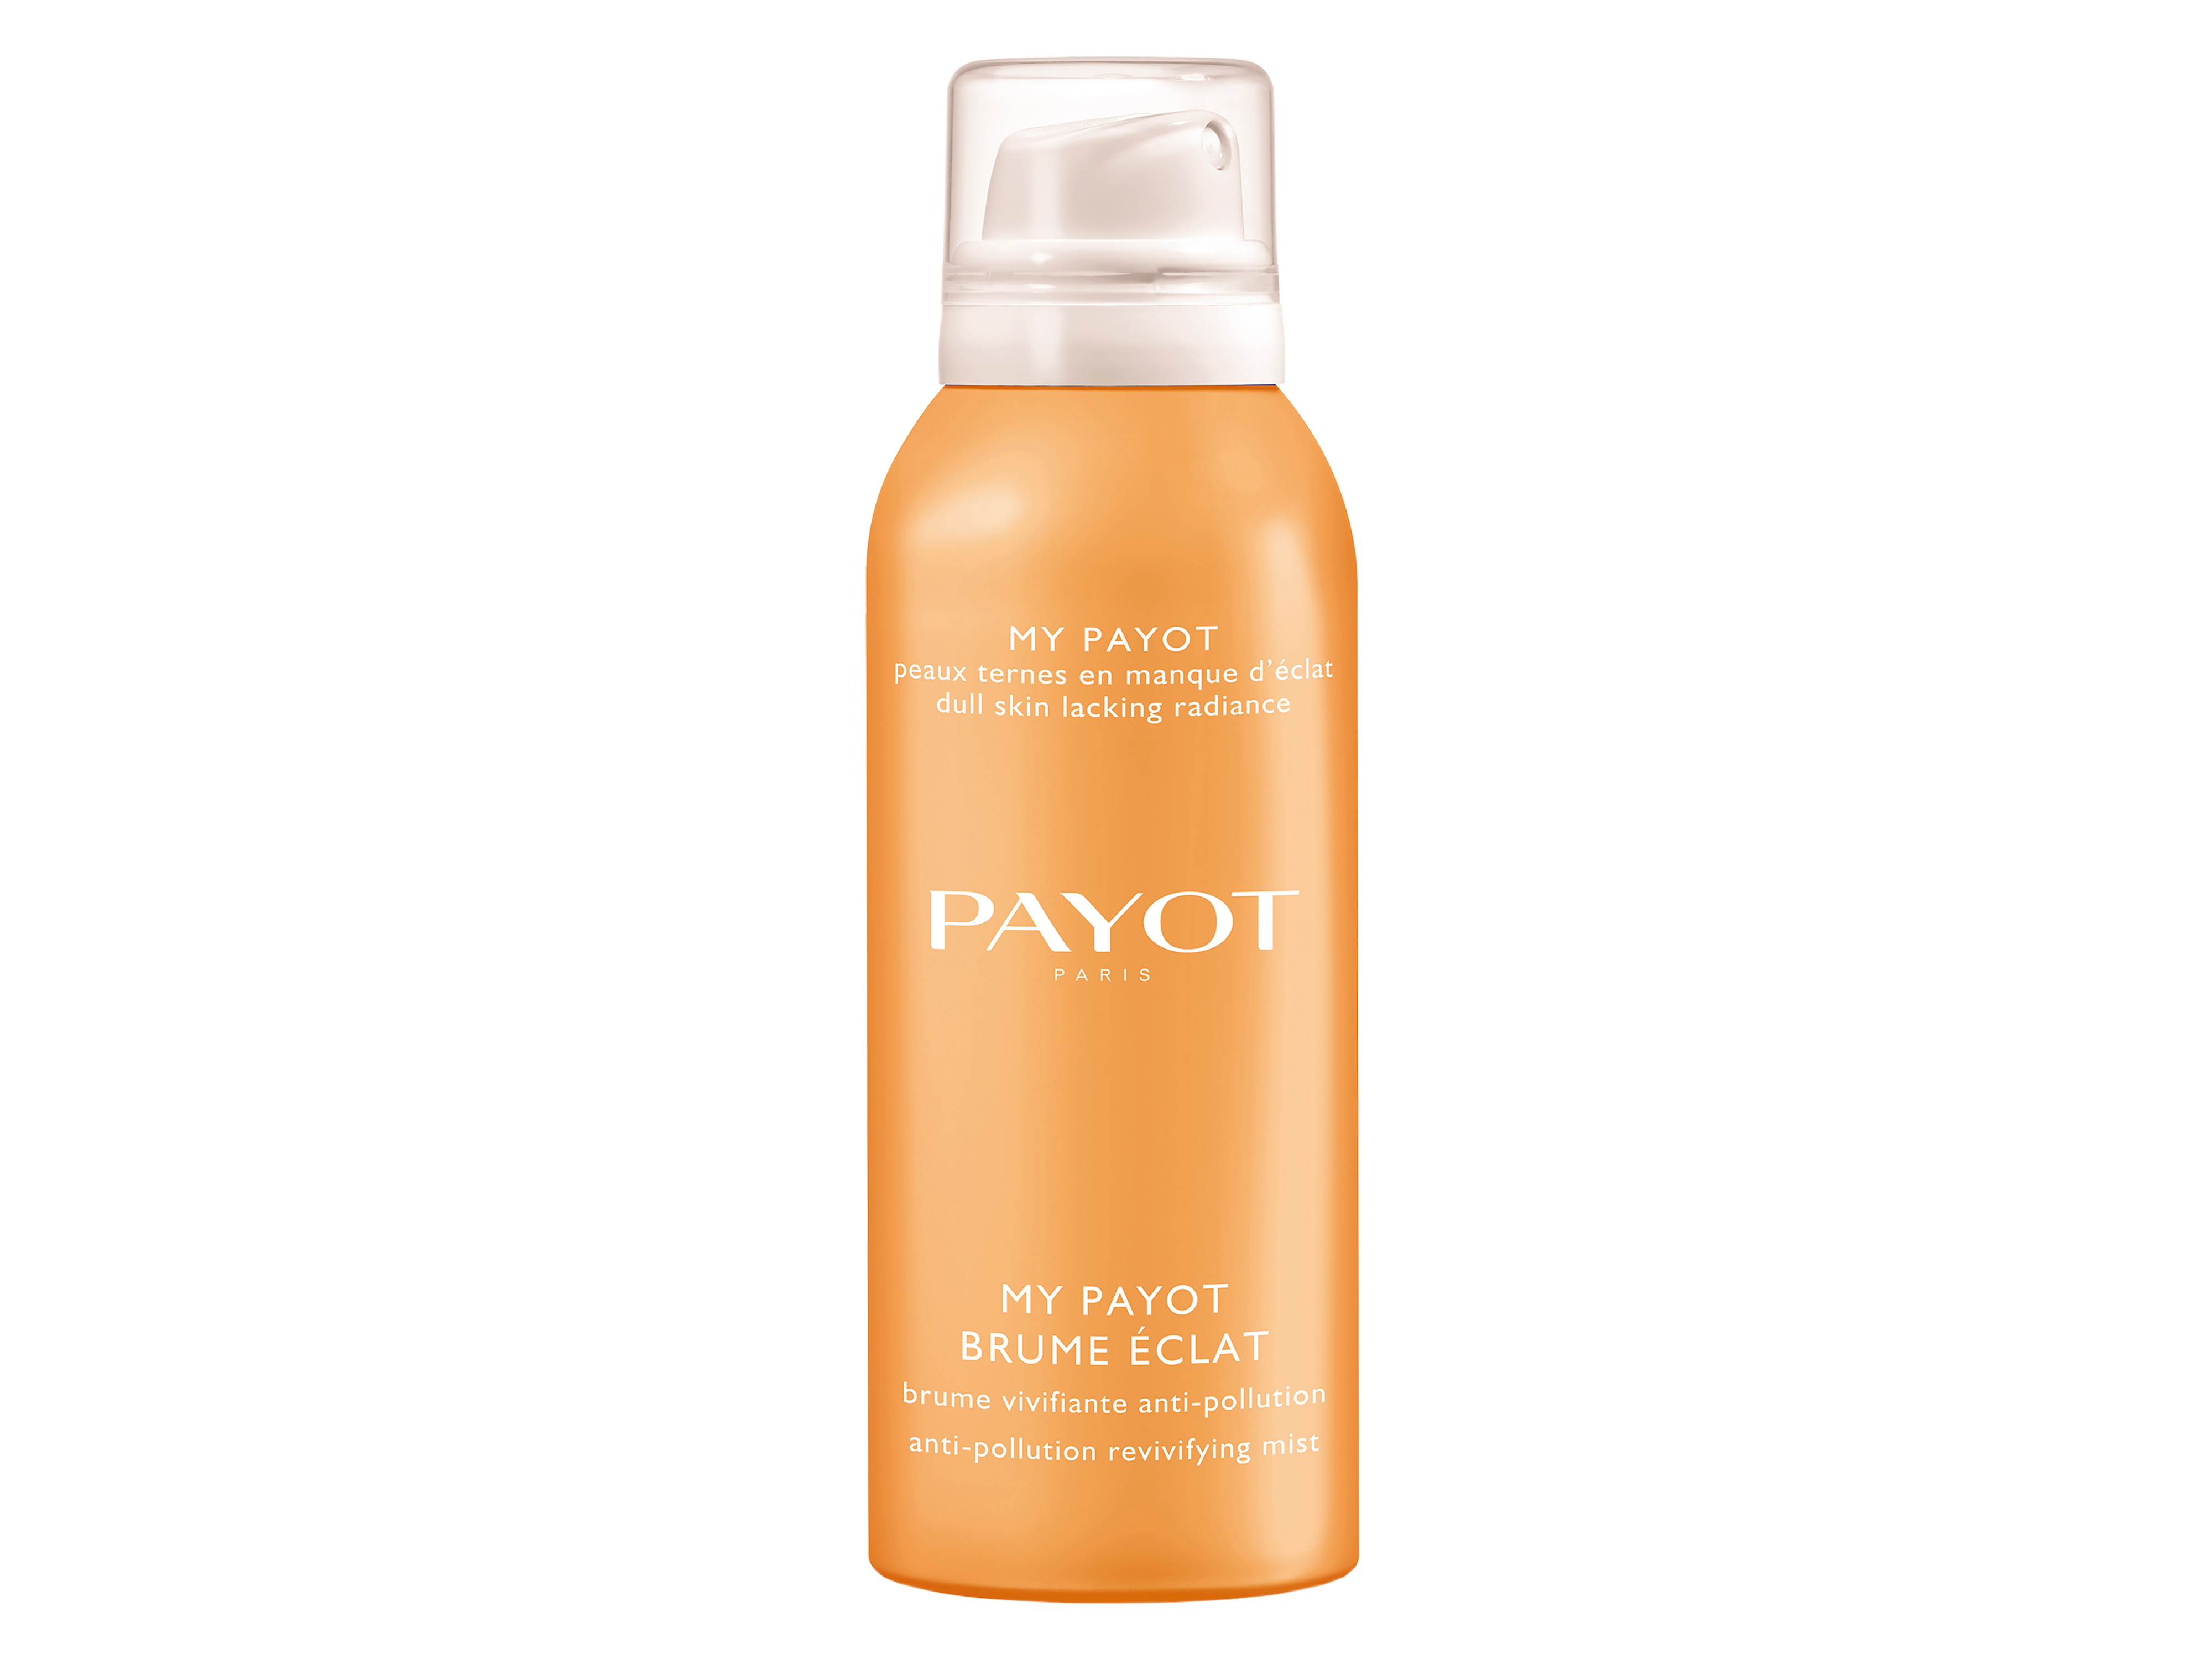 Payot My Payot Brume Eclat, 125 ml